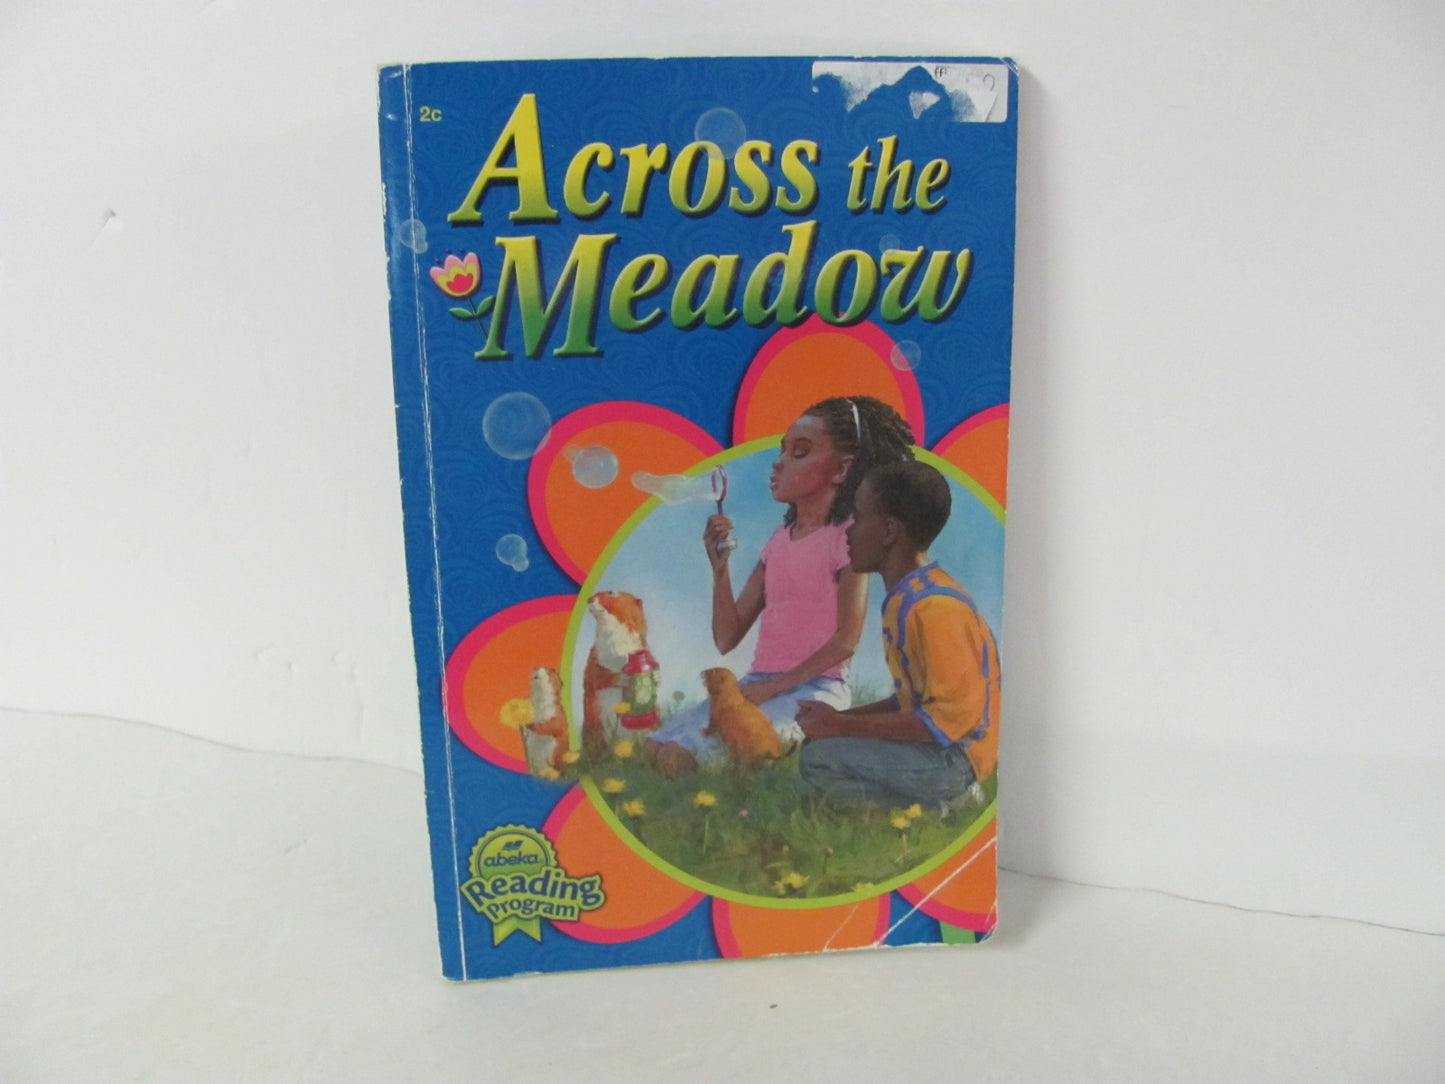 Across the Meadow Abeka Student Book Pre-Owned 2nd Grade Reading Textbooks